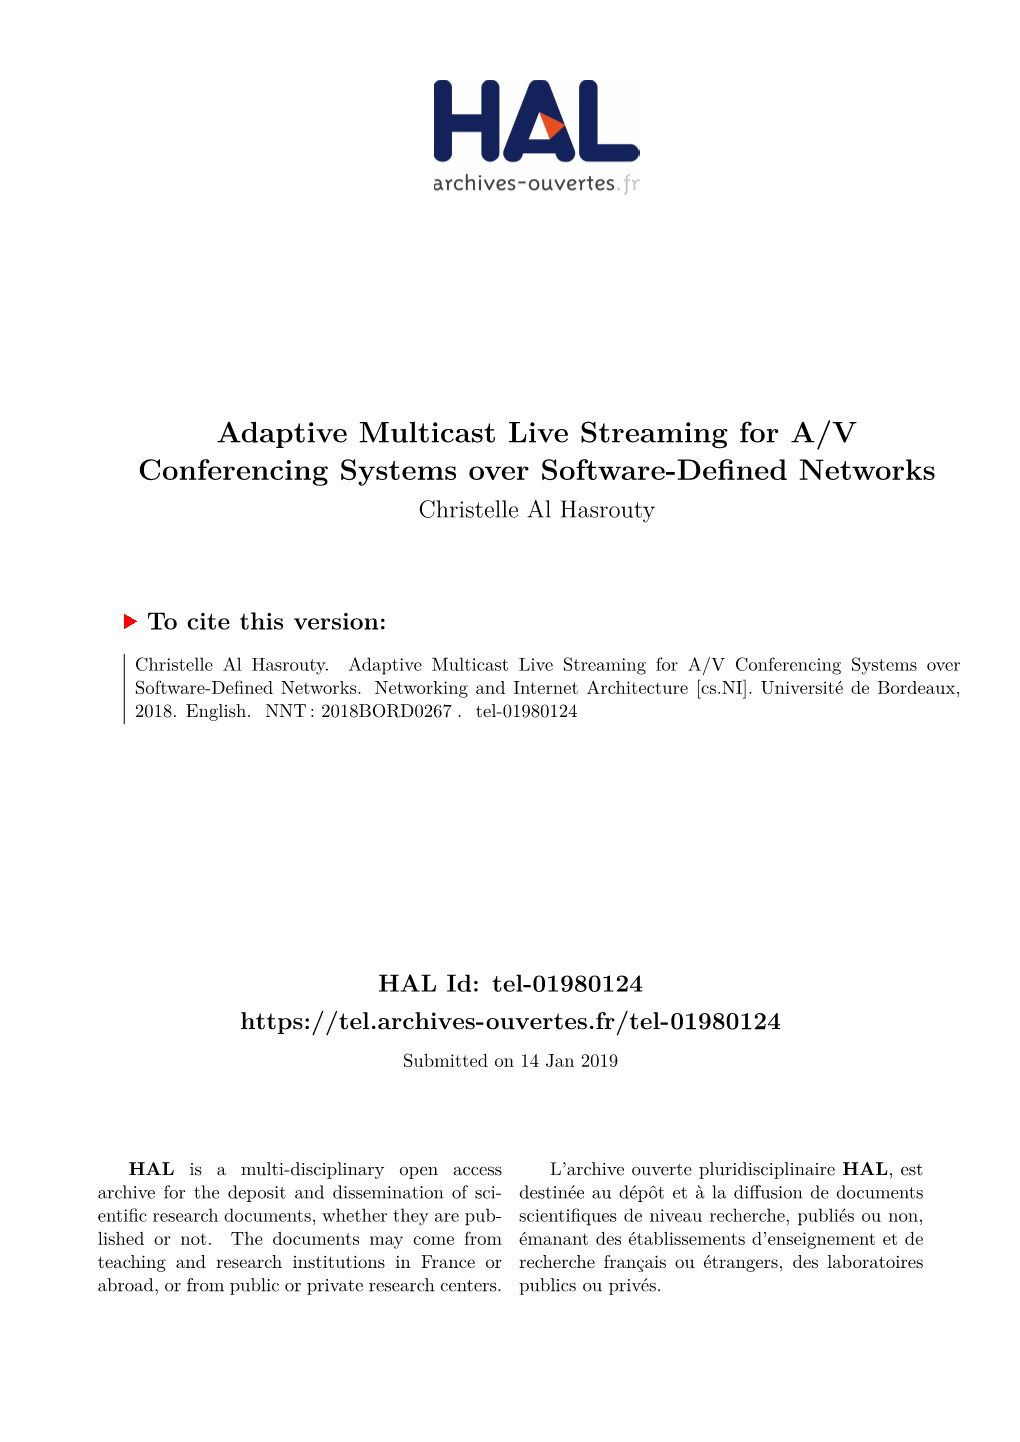 Adaptive Multicast Live Streaming for A/V Conferencing Systems Over Software-Defined Networks Christelle Al Hasrouty